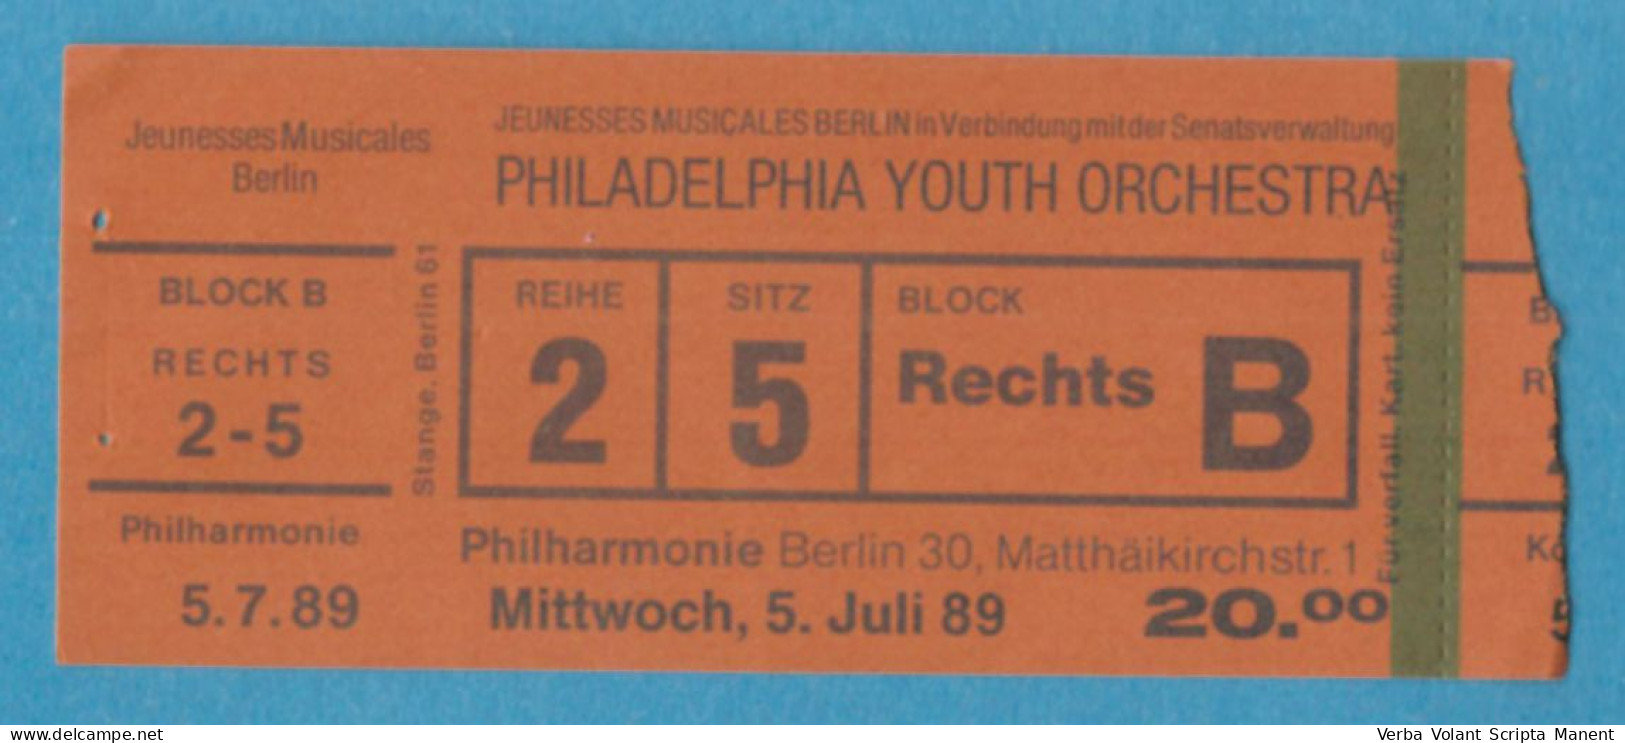 Q-4500 * Germany - PHILADELPHIA YOUTH ORCHESTRA, Philharmonie, Berlin - 1989 - Concert Tickets